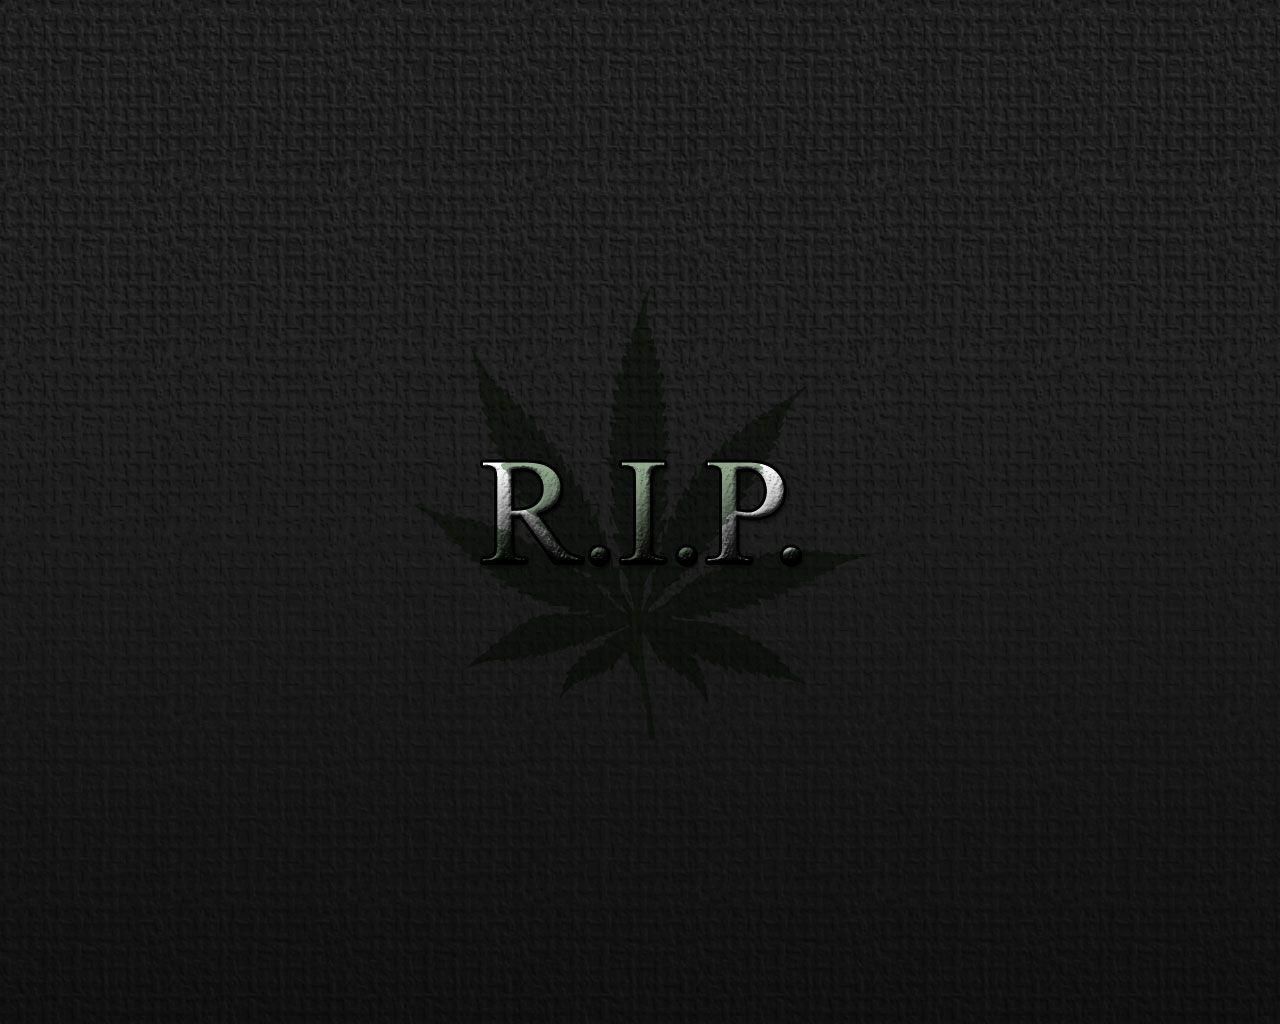 Best Rip Wallpaper in High Quality, Rip Background